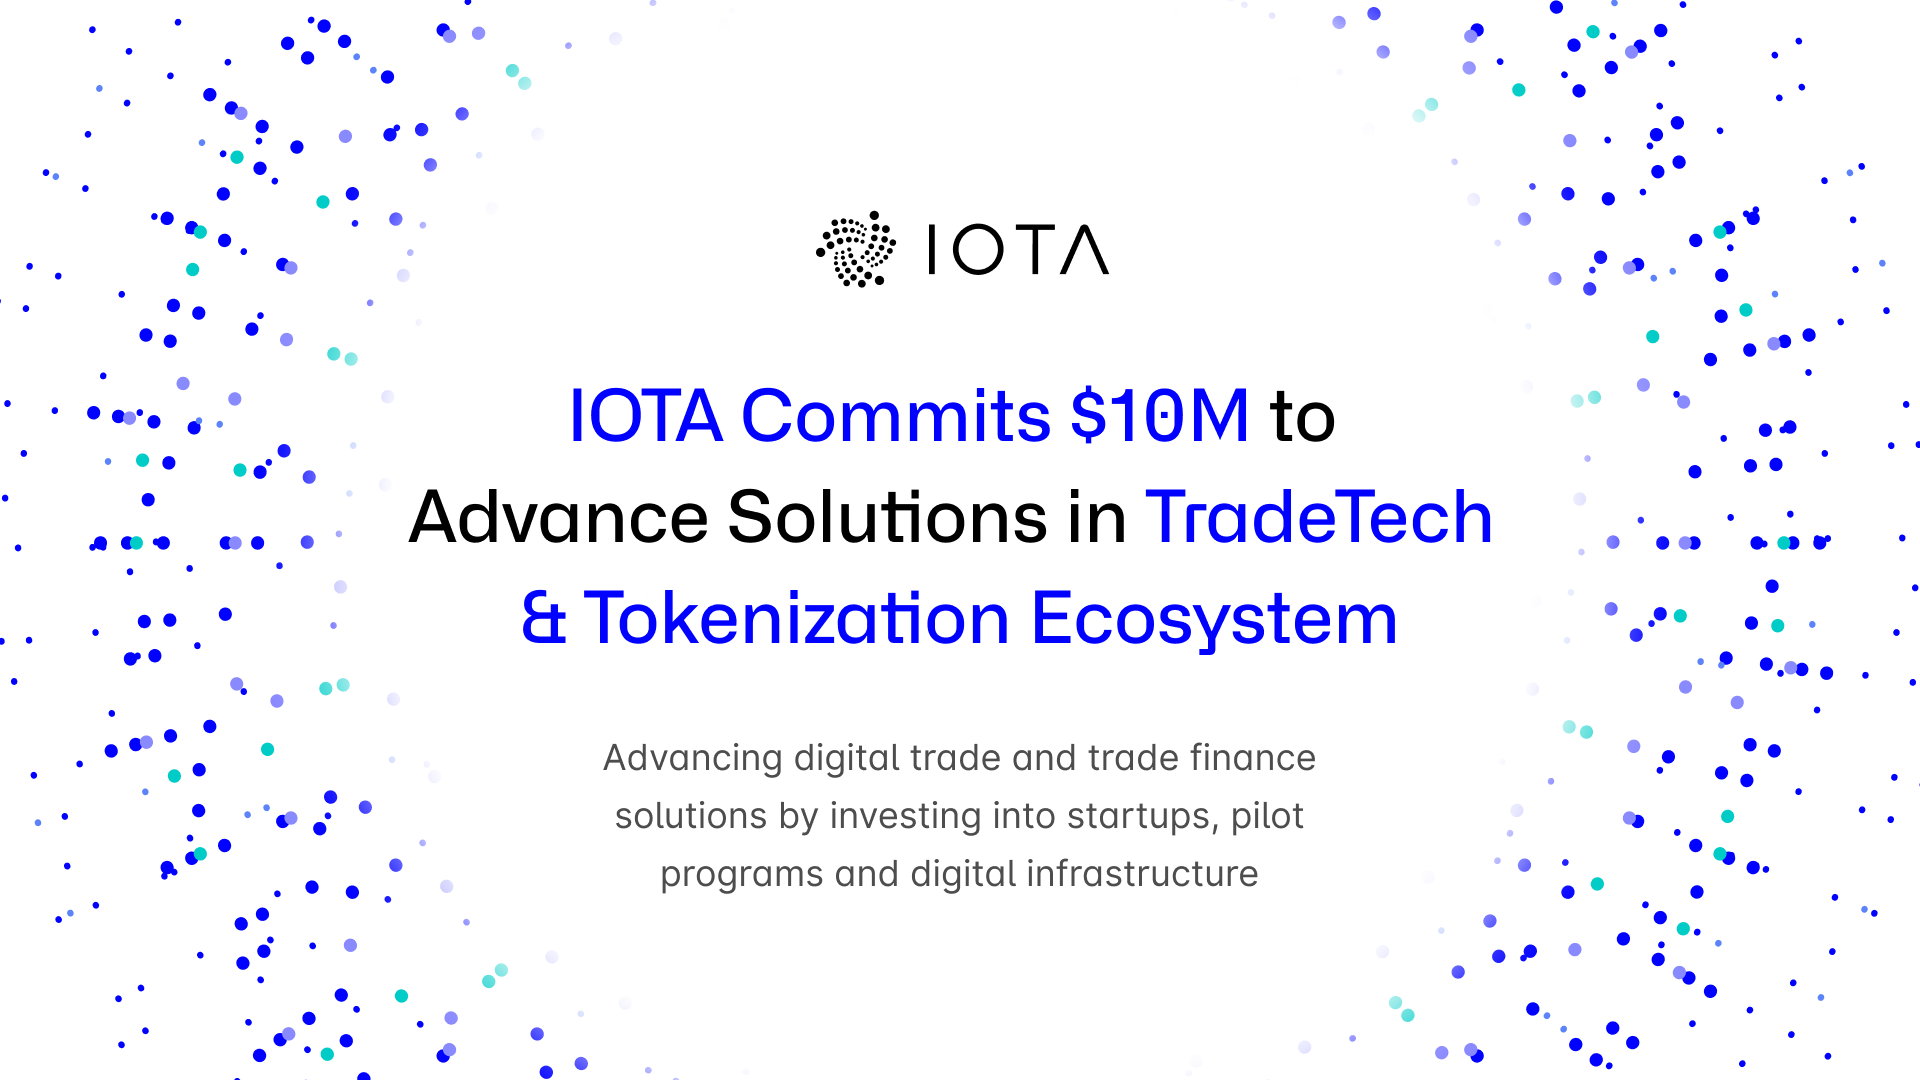 IOTA Commits $10M to Advance Solutions in TradeTech and Tokenization Ecosystem